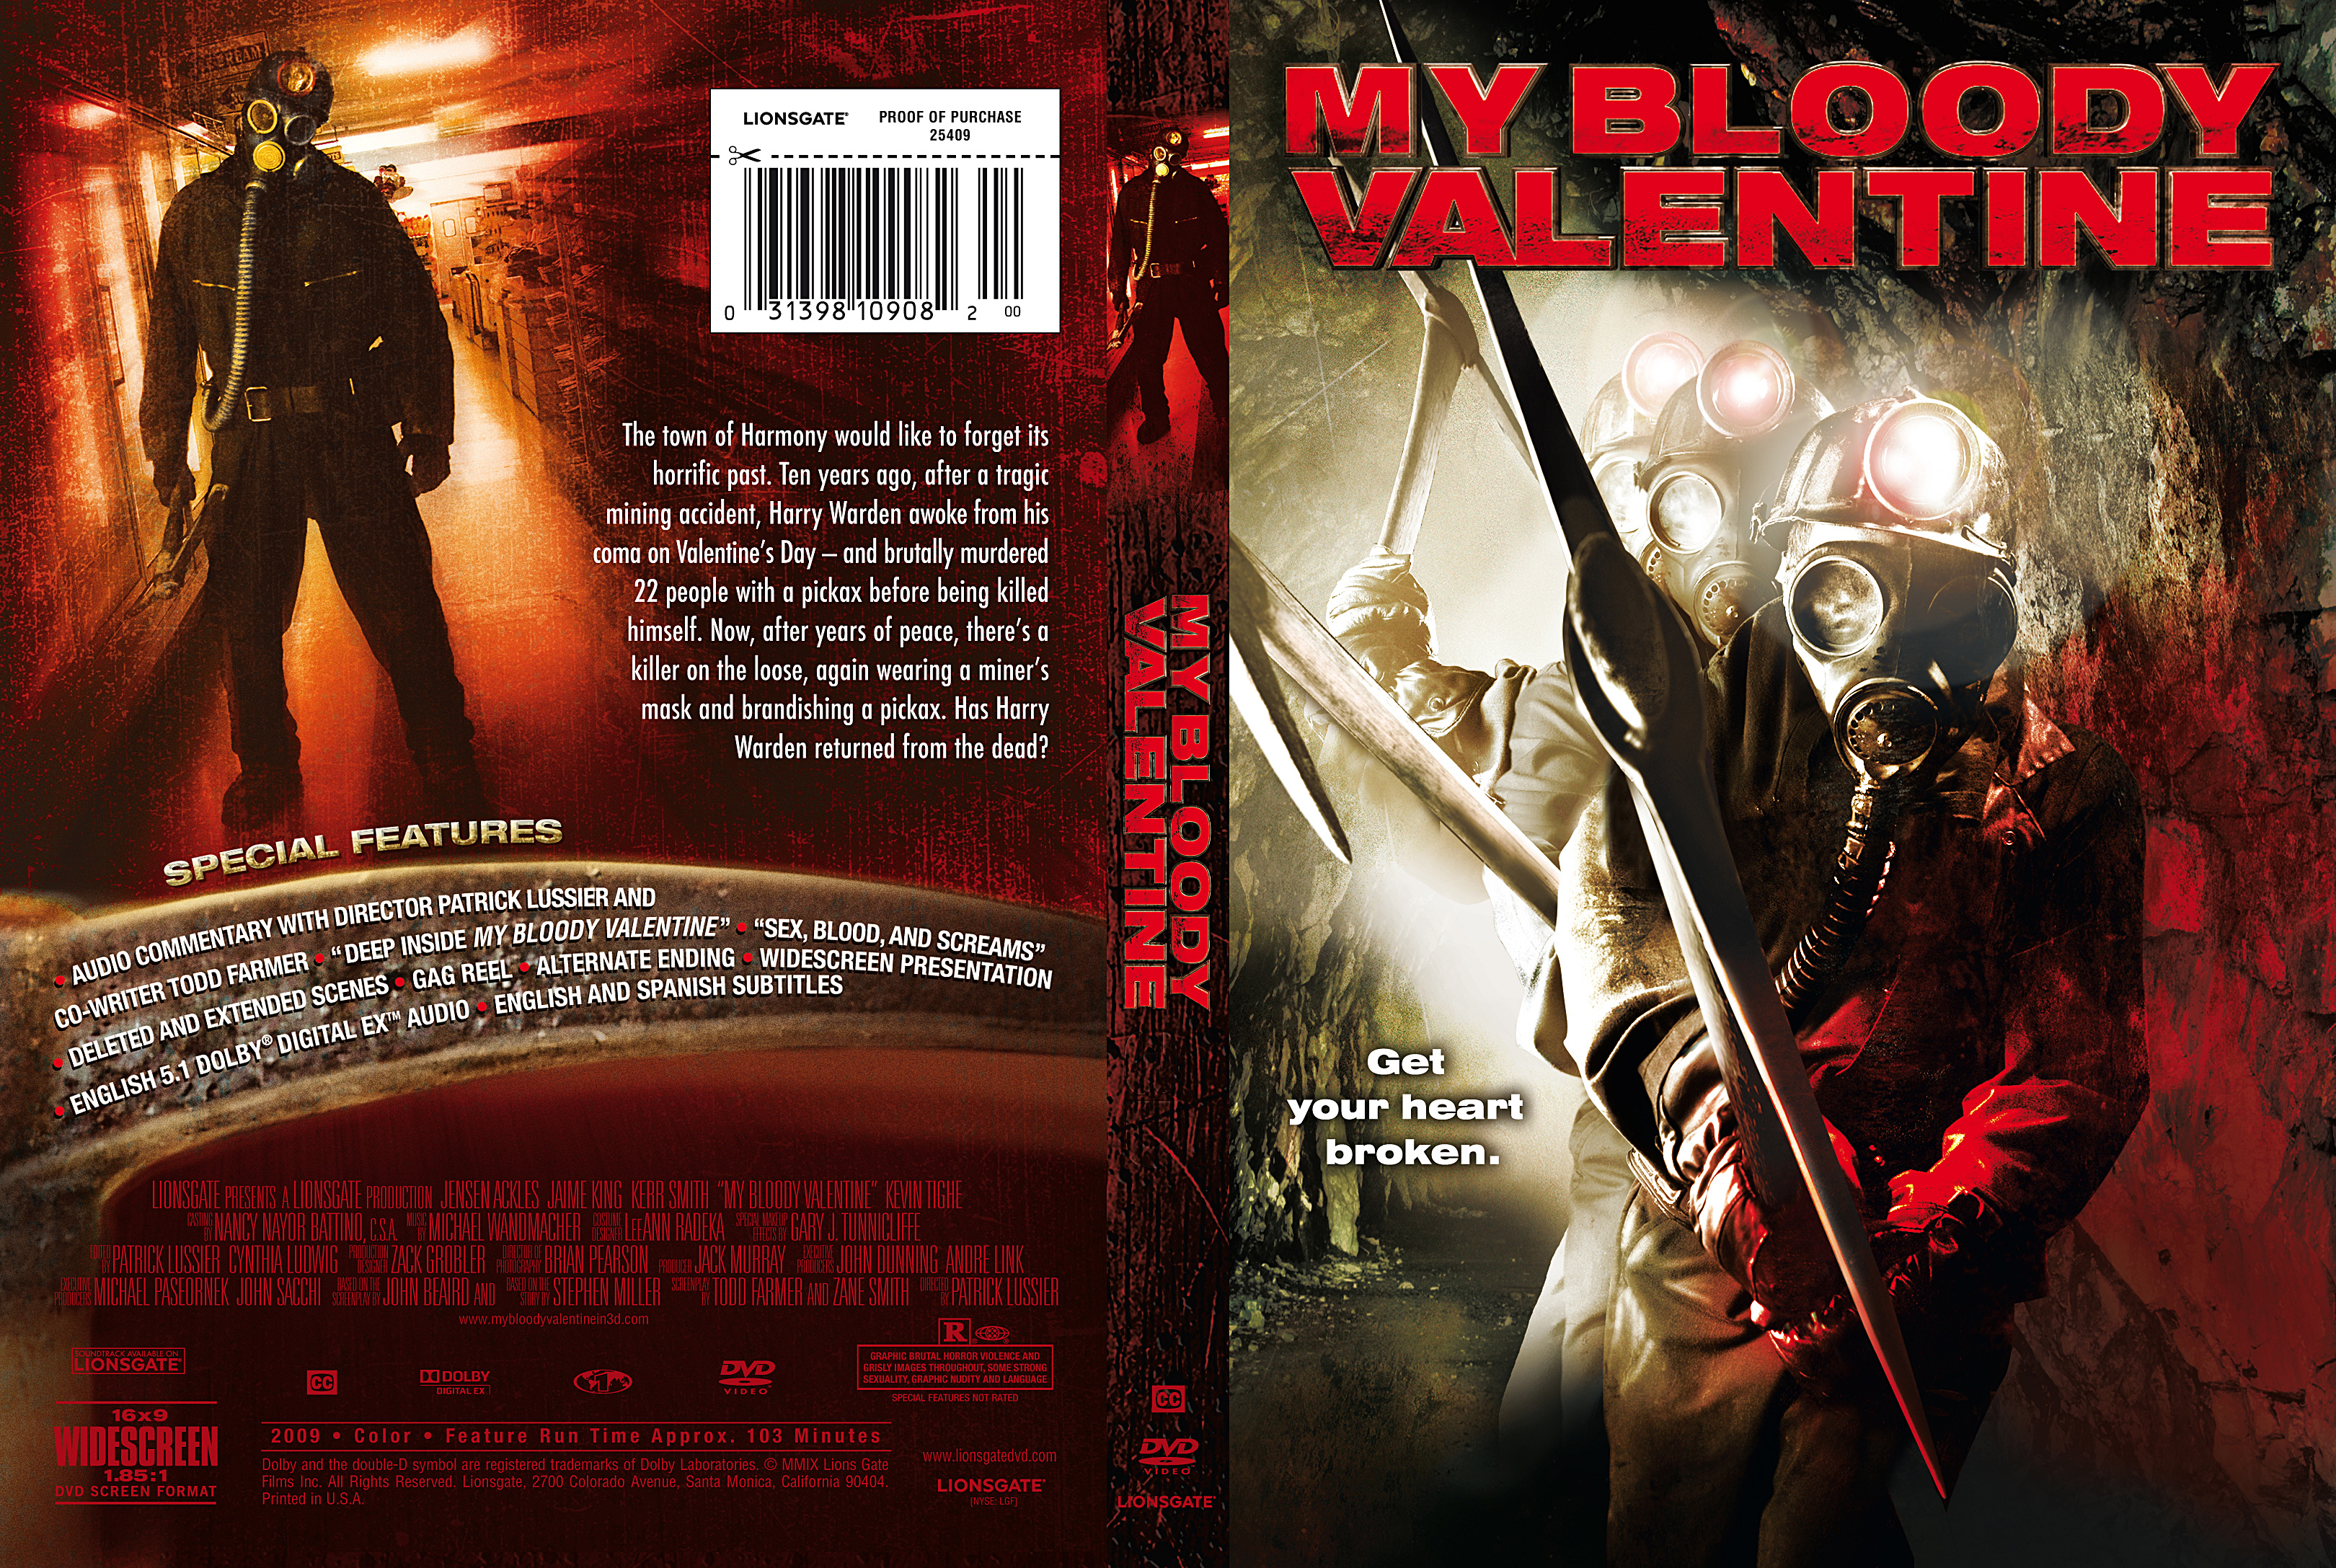 My Bloody Valentine [2009] | DVD Covers | Cover Century | Over 1.000.000 Album Art covers for free